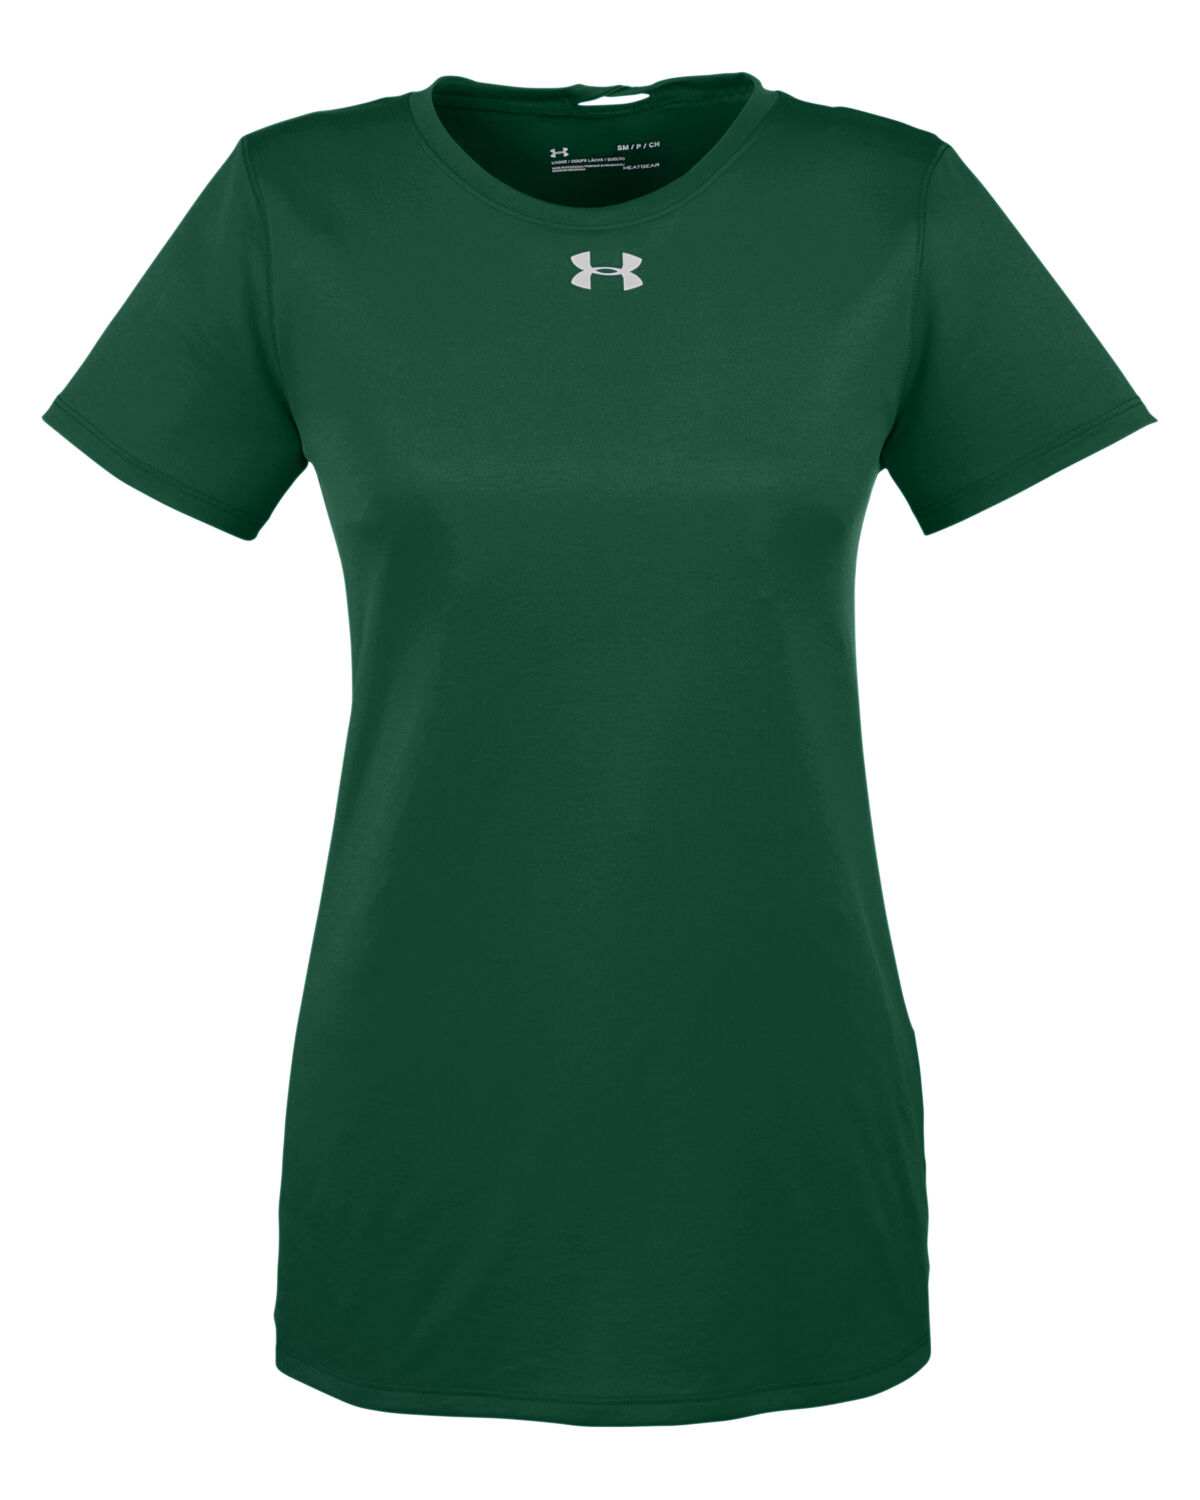 Custom Branded Under Armour T-Shirts - Forest Green/Metallic Silver